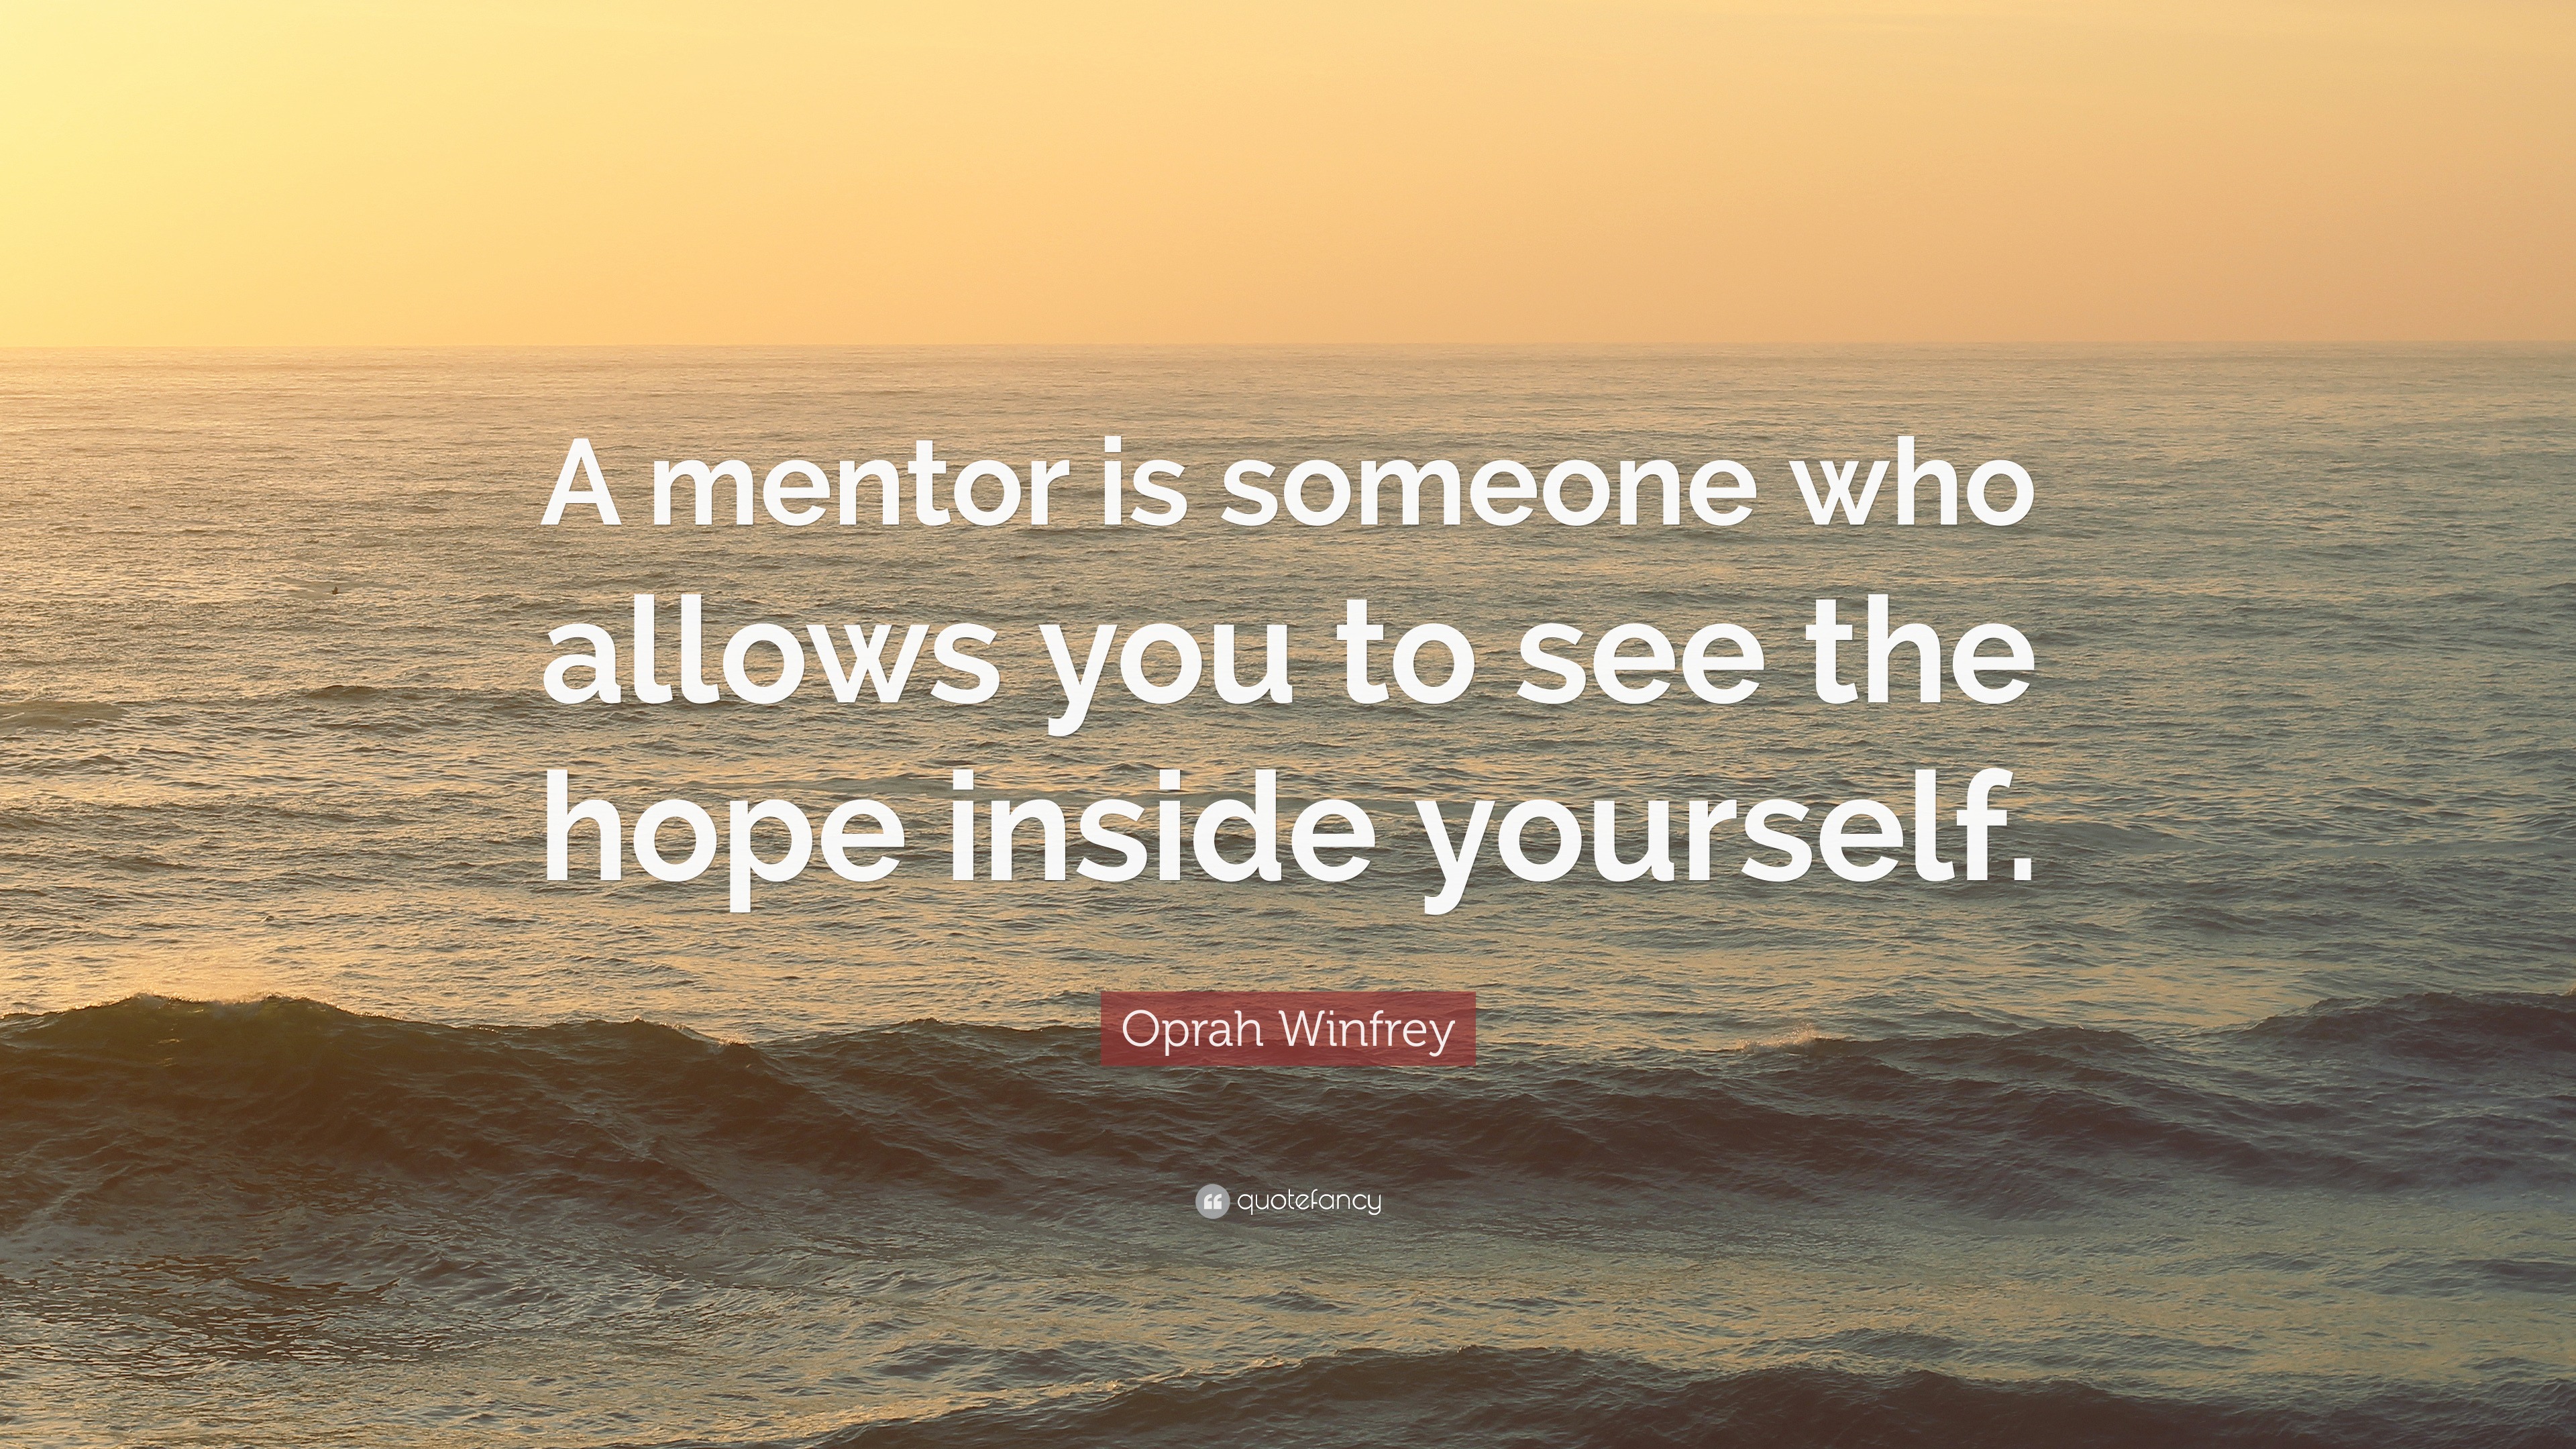 Oprah Winfrey Quote: “A mentor is someone who allows you to see the